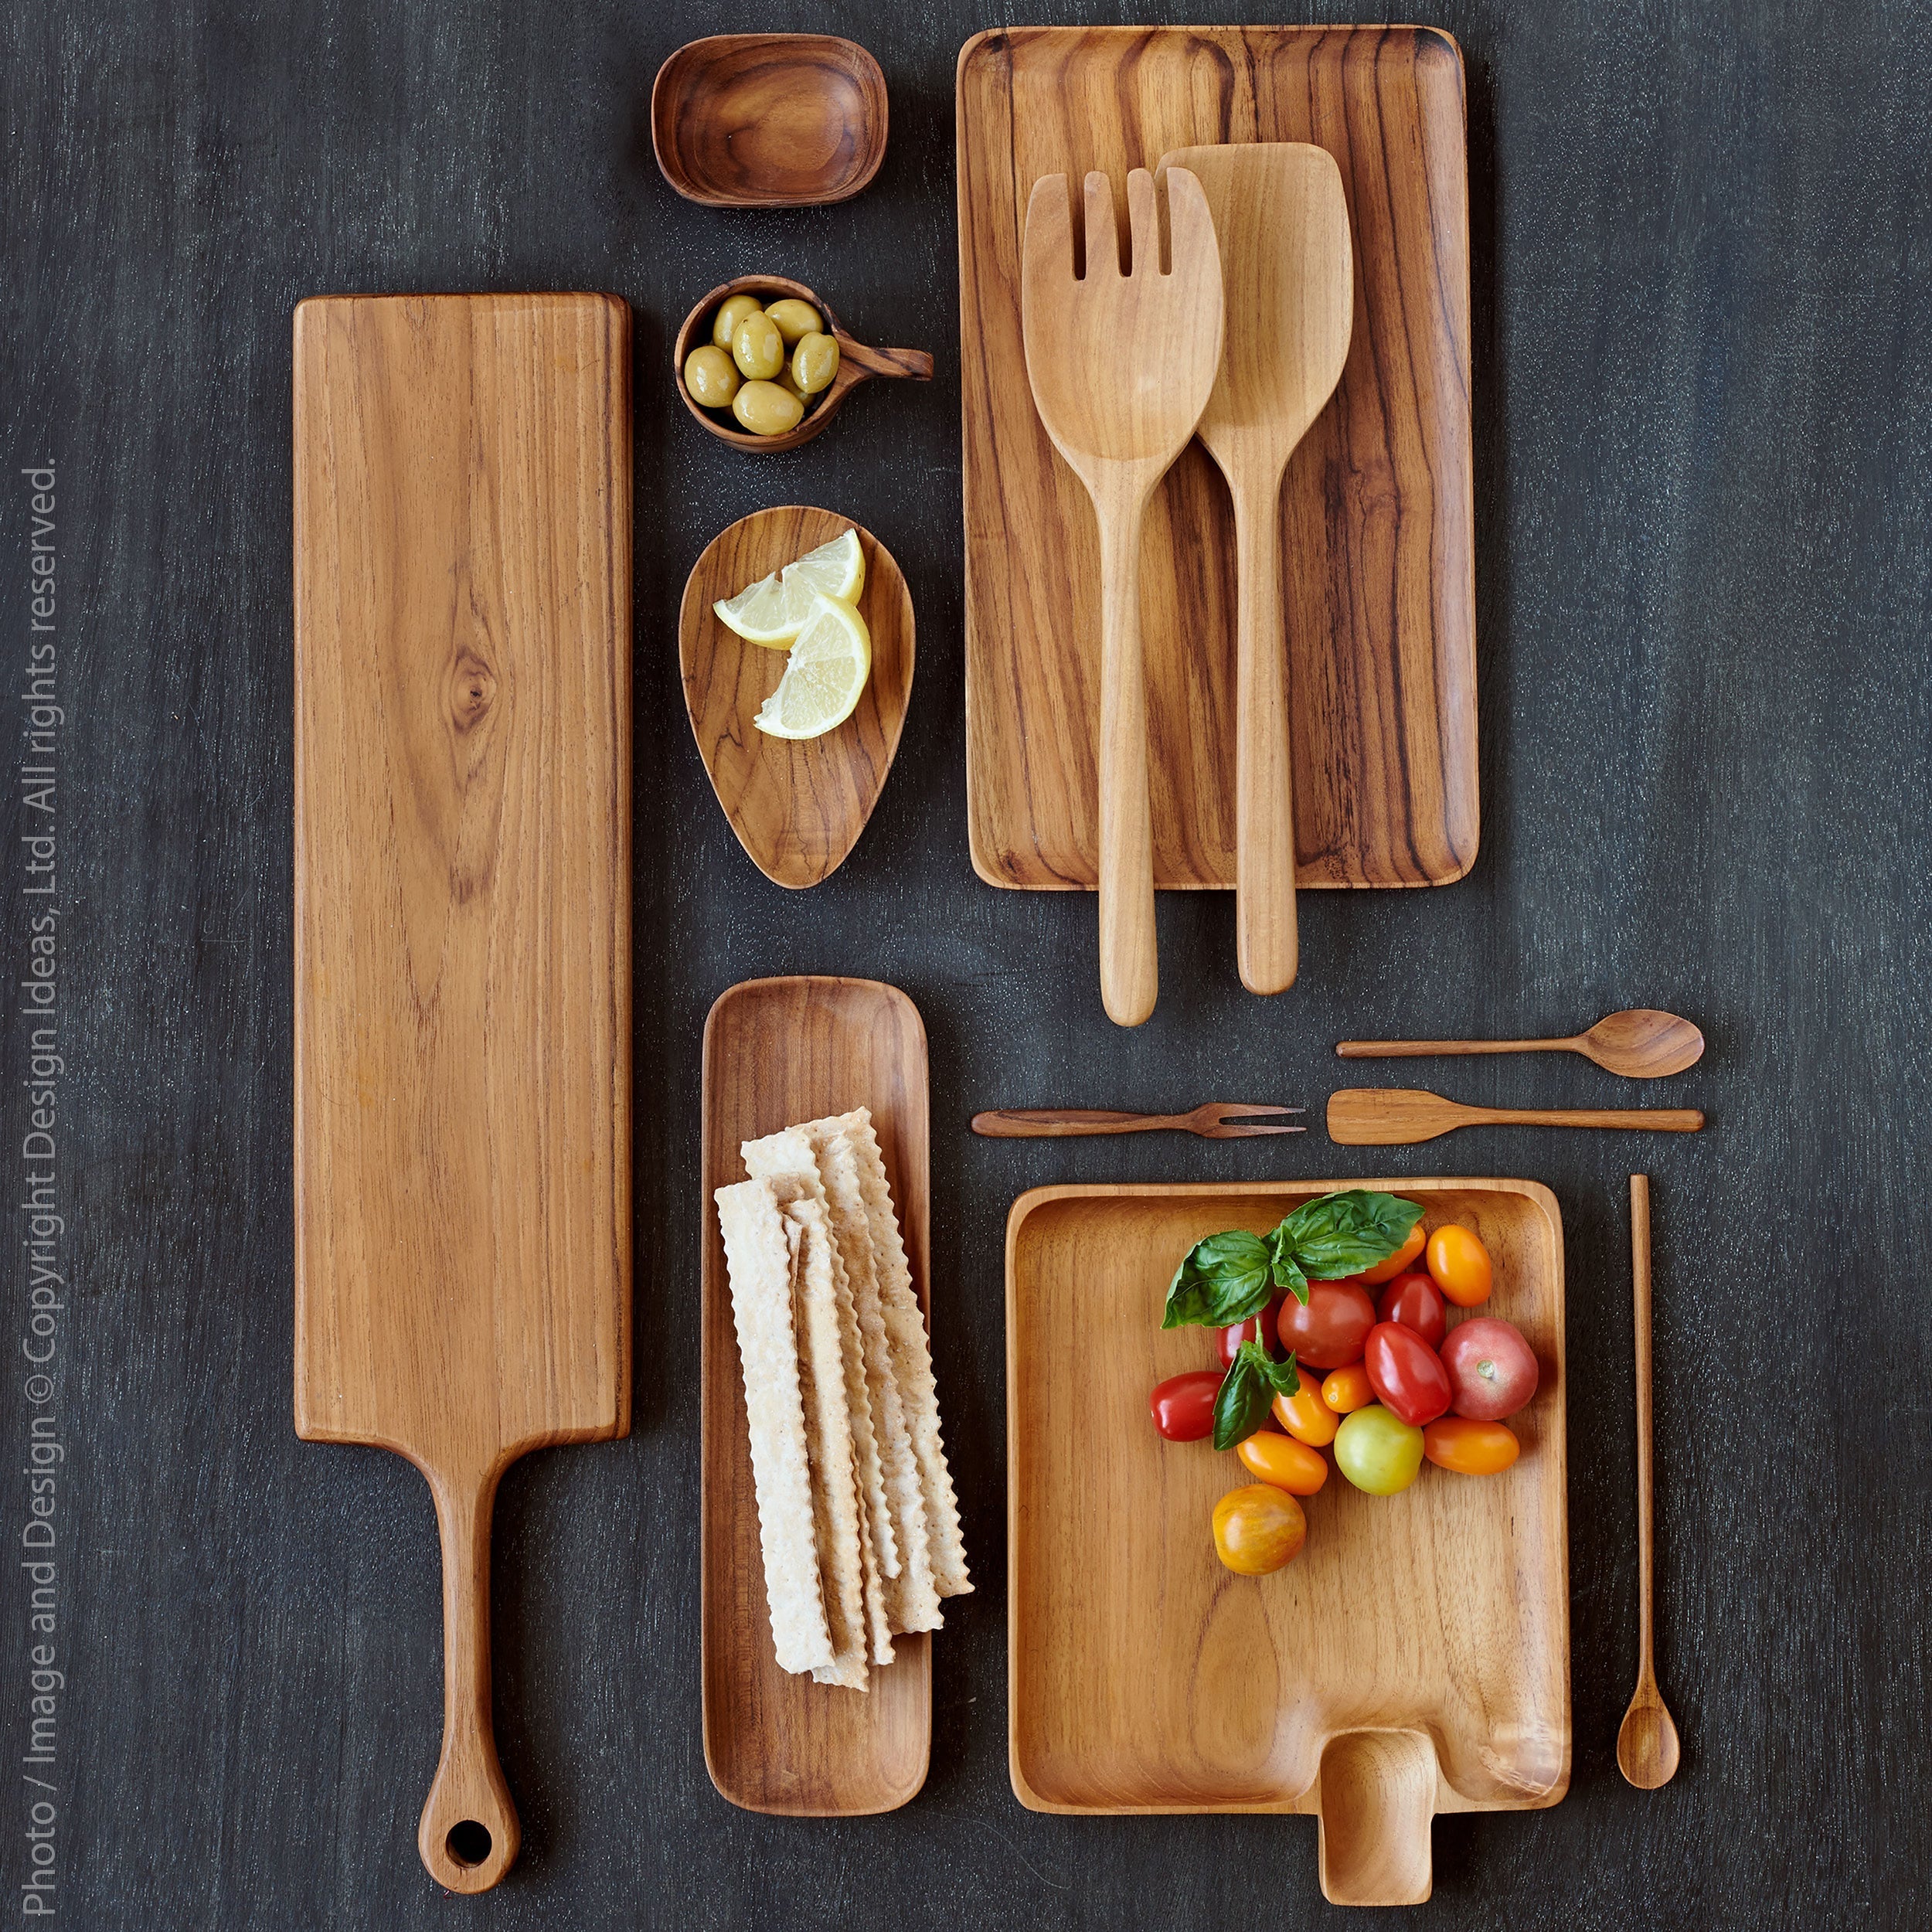 Chiku Teak Fork Black Color | Image 3 | From the Chiku Collection | Exquisitely assembled with natural teak for long lasting use | These utensils are sustainably sourced | Available in natural color | texxture home